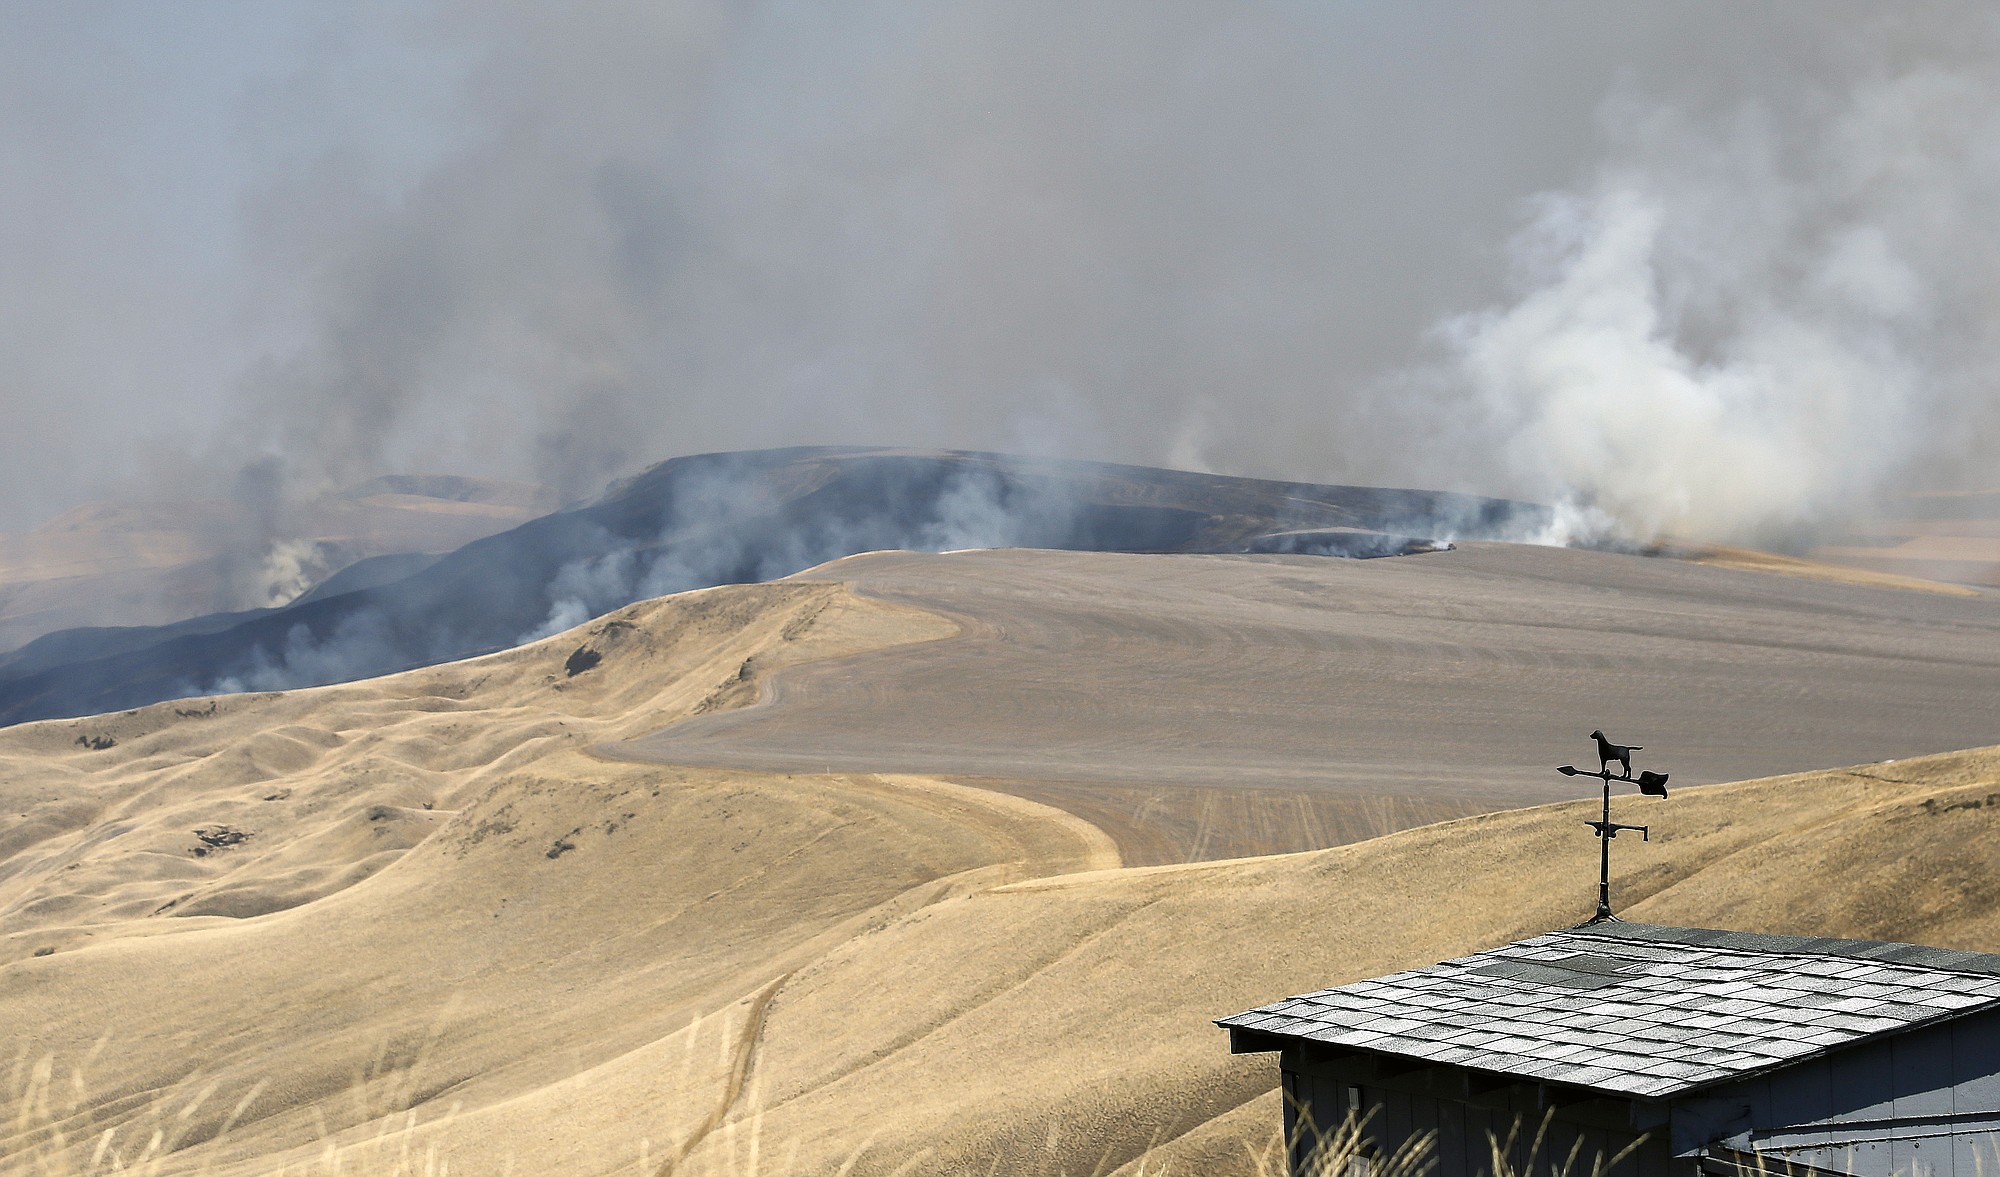 Fire crews responded to a brush fire just east of Prosser, Wash., and just South of Interstate 82 on Tuesday.